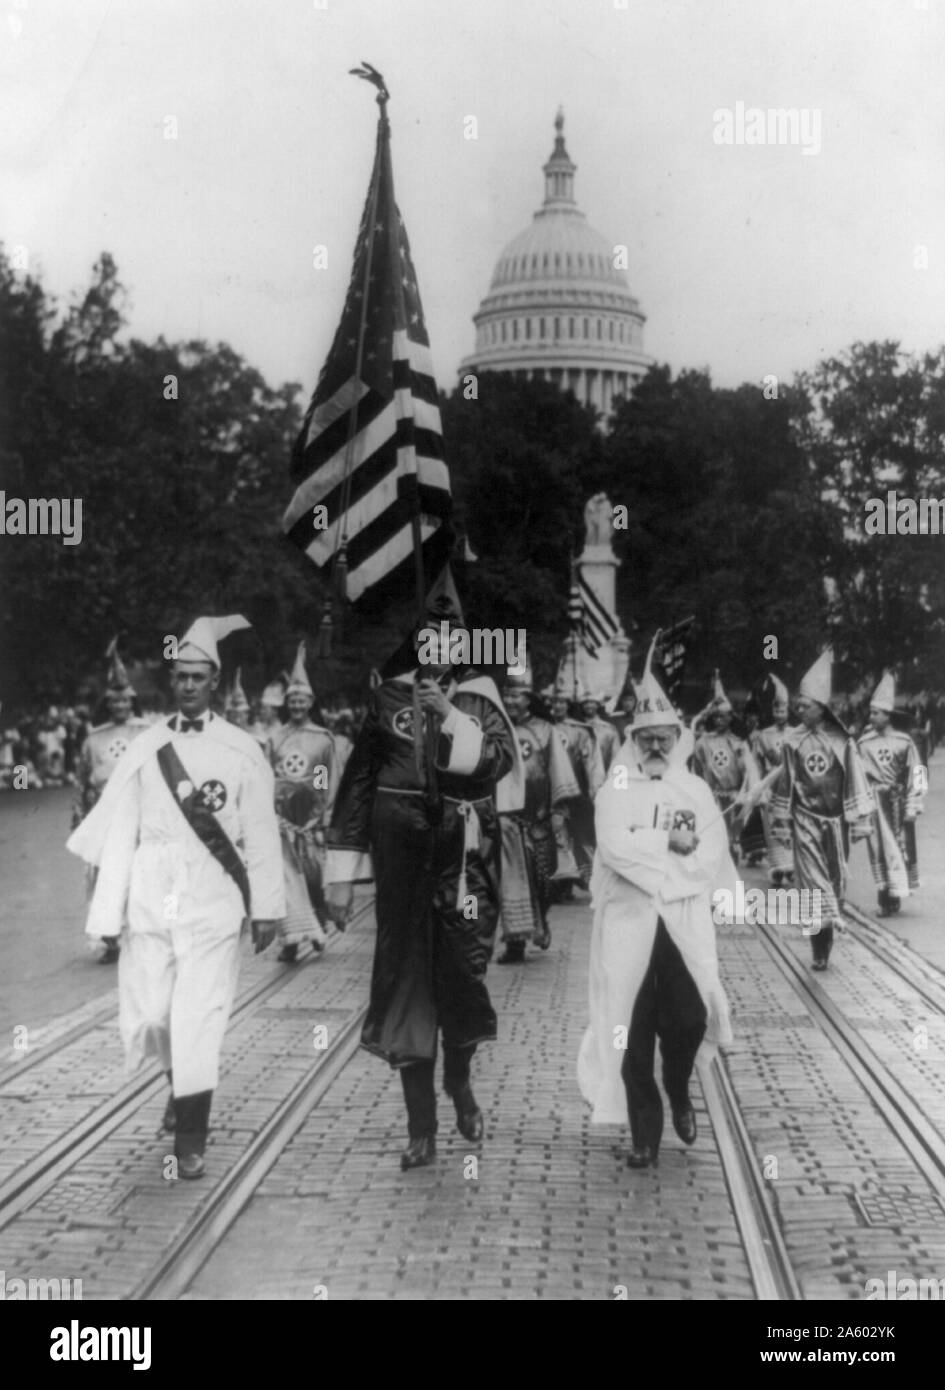 Photographic print shows a group parading on the street in front of the dome of the U.S. Capitol. In the background, leading the Kul Klux Klan parade which was held in Washington D.C.;on the right, is Mr J.M. Fraser from Houston, Texas. Stock Photo